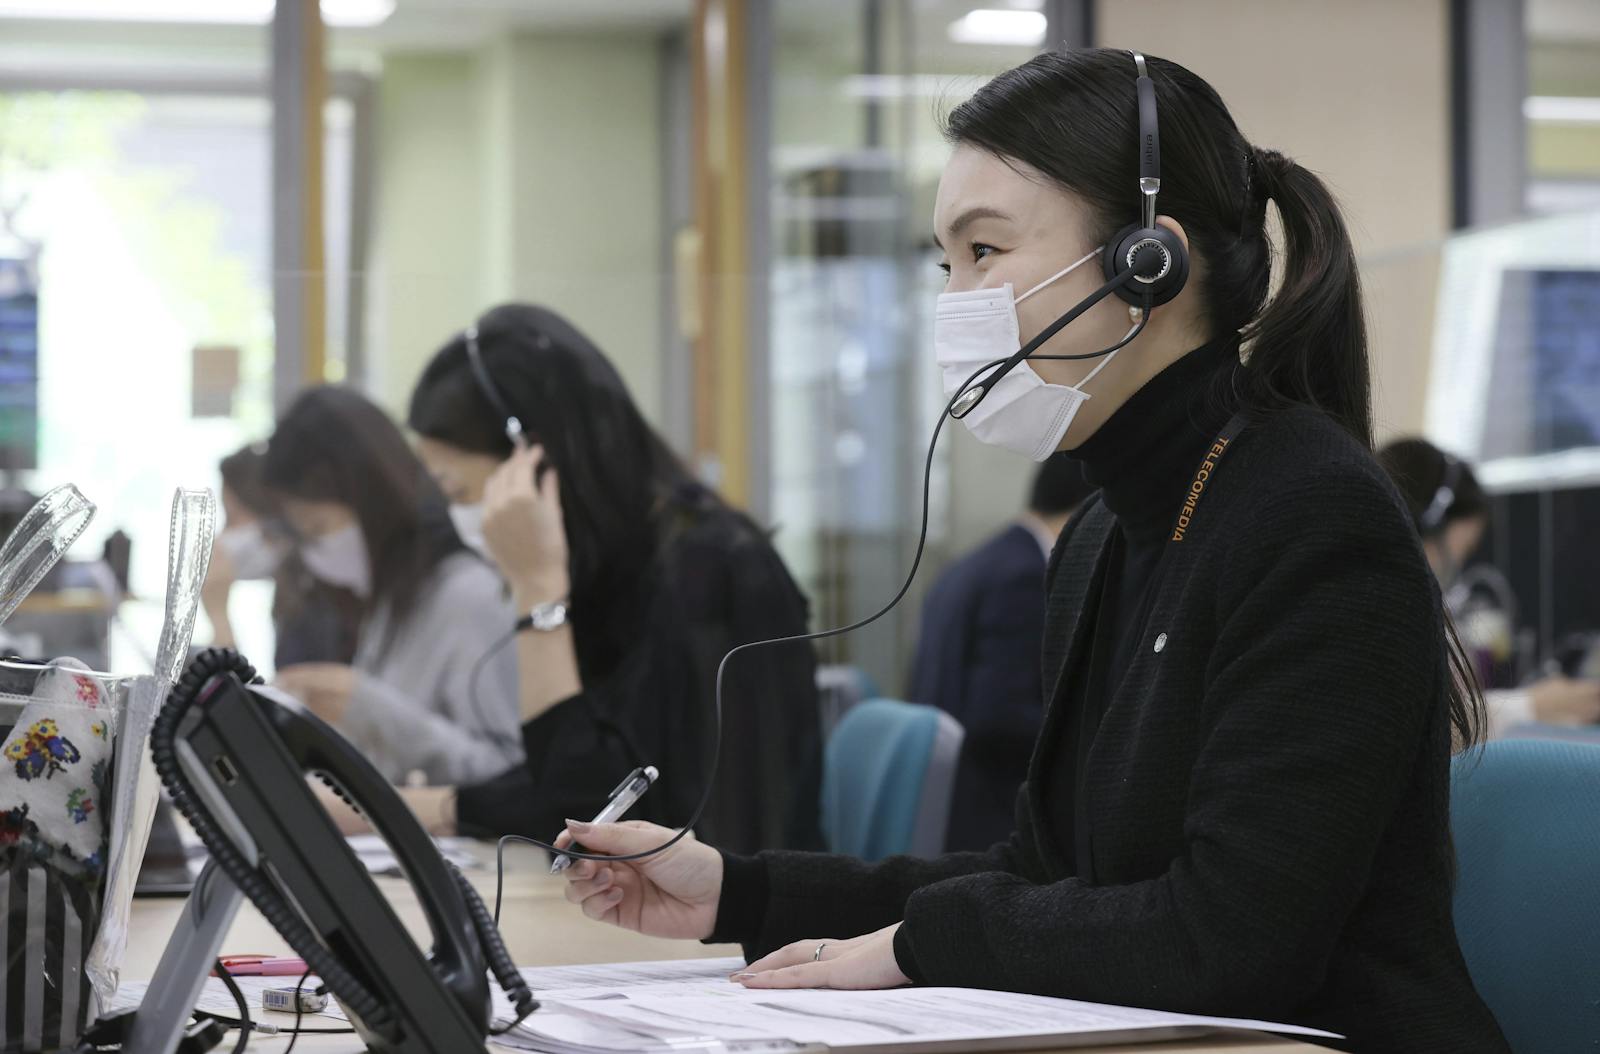 Employees at Japan's JAL answer phone calls. The need to support off-premise call center employees during the pandemic boosted demand for companies such as Talkdesk. Photo: Yomiuri Shimbun via AP Images